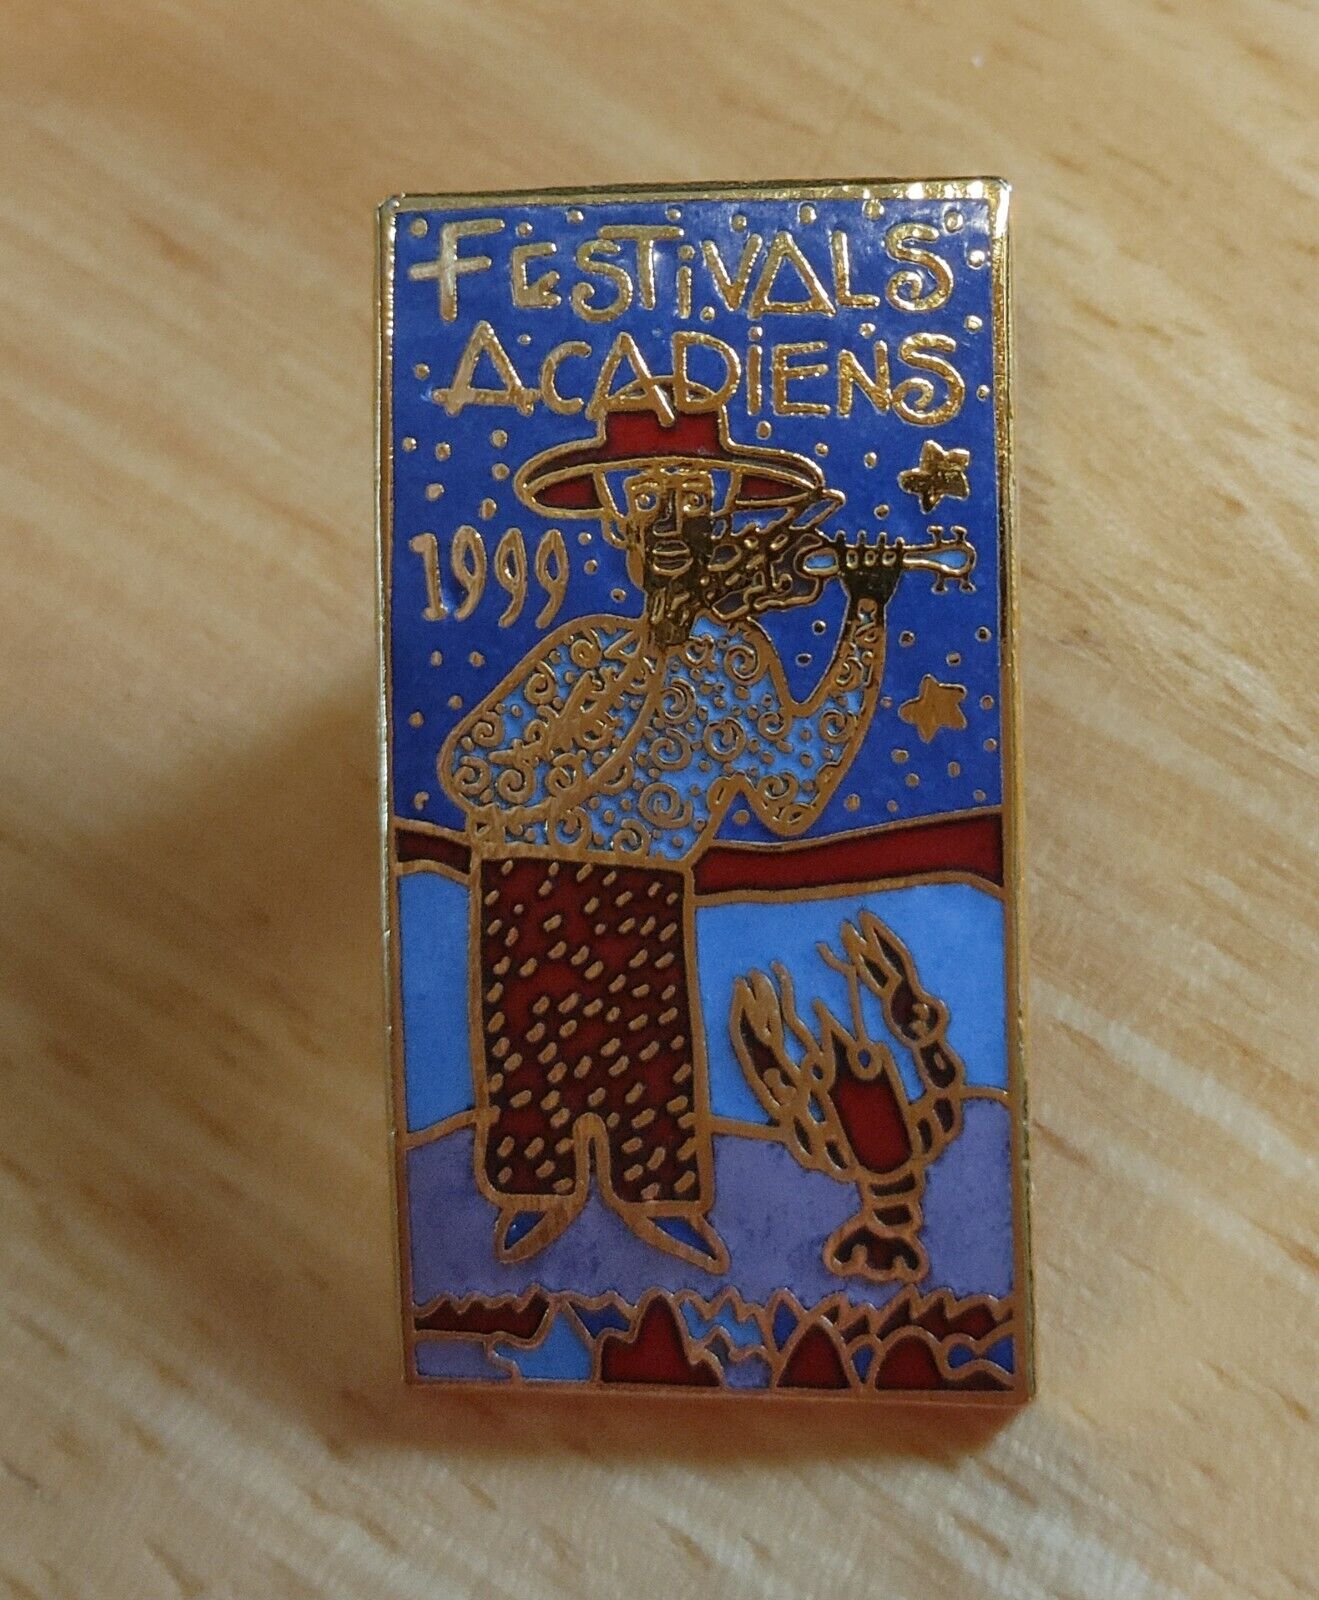 Gold Tone Metal And Enamel 1999 Festivals Acadiens Pin - Collectible